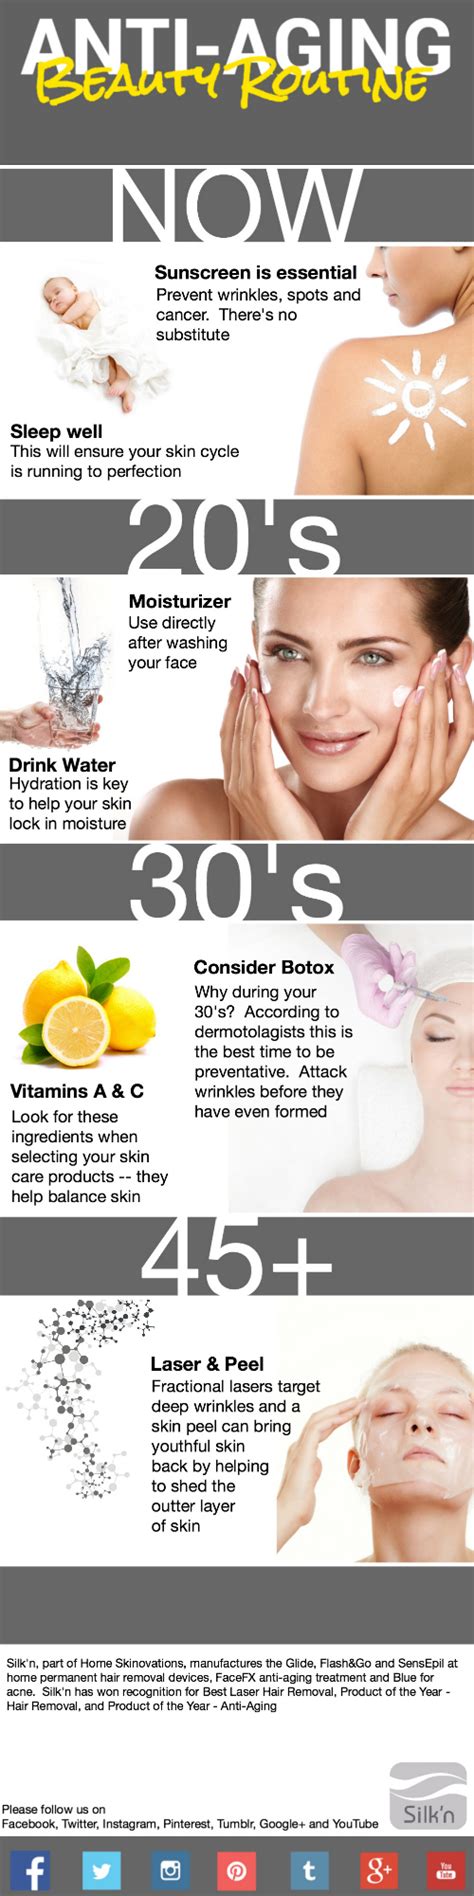 anti aging skin care tips for different ages infographic lifecellskin